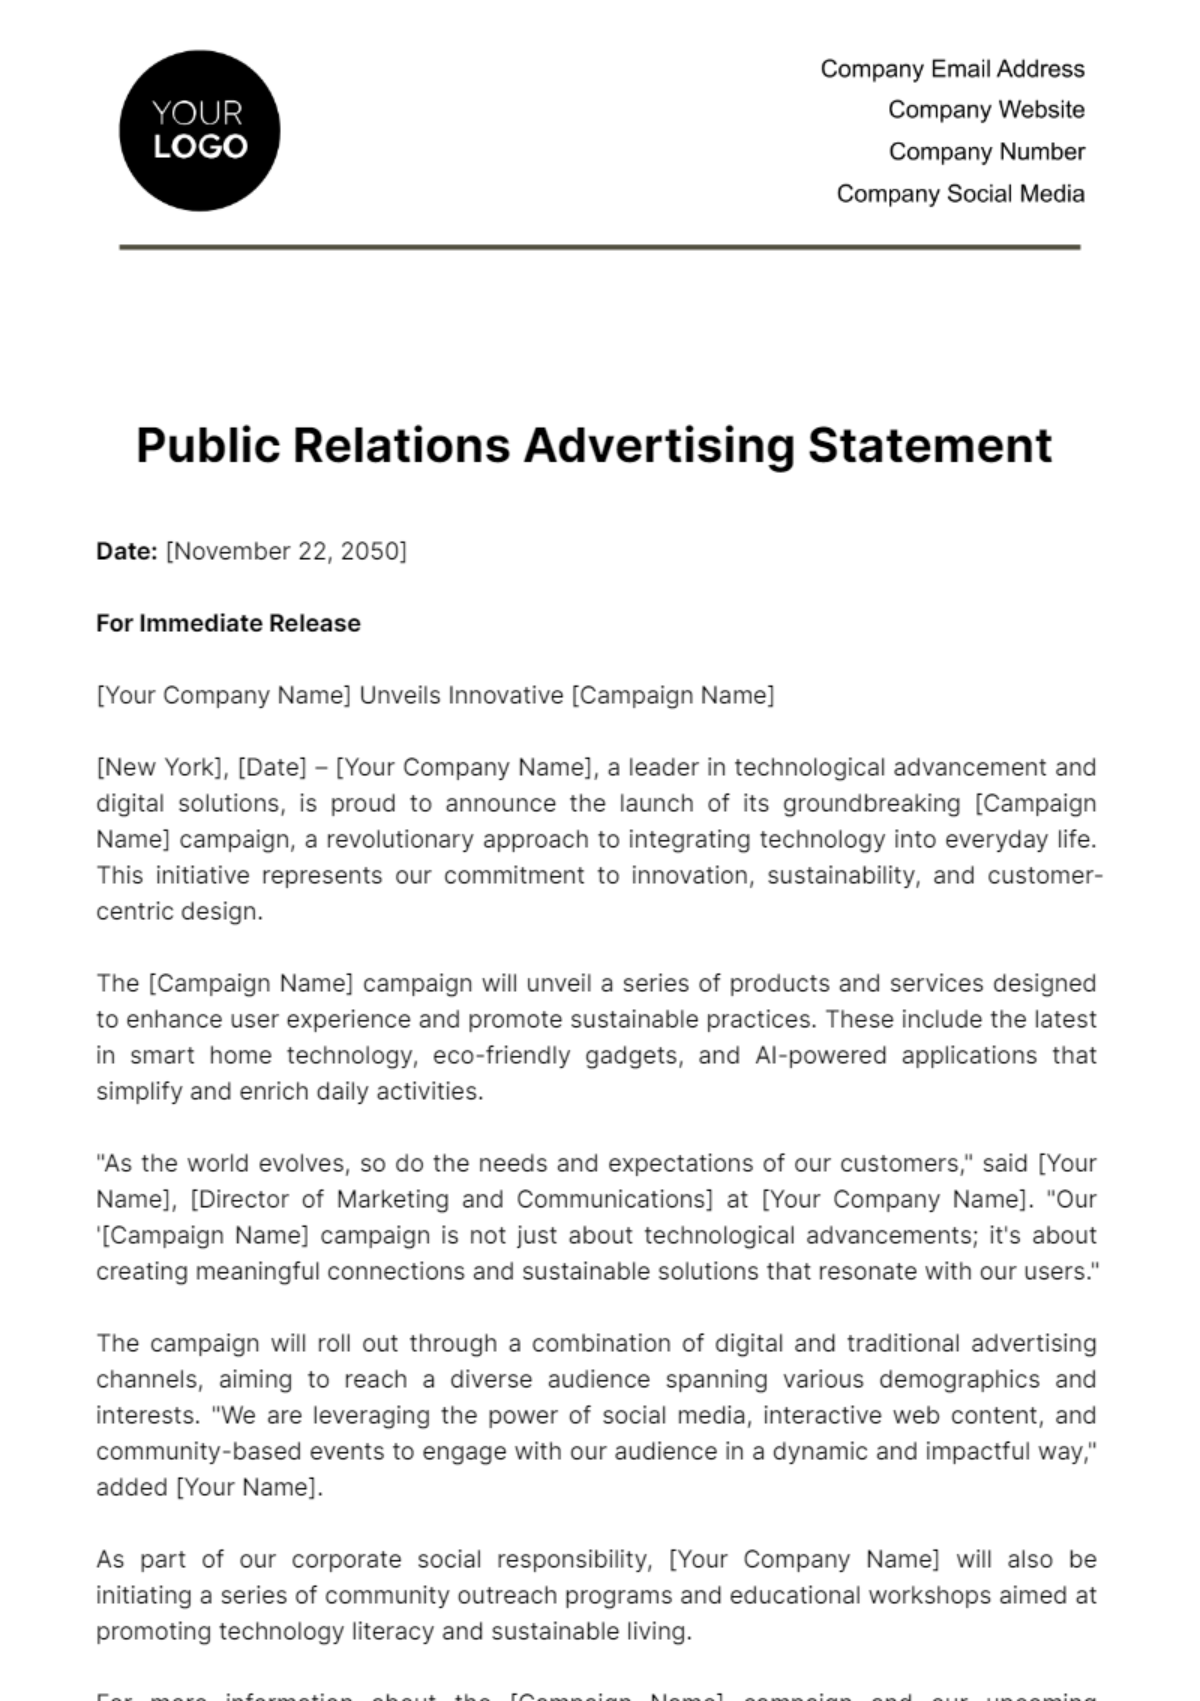 Free Public Relations Advertising Statement Template